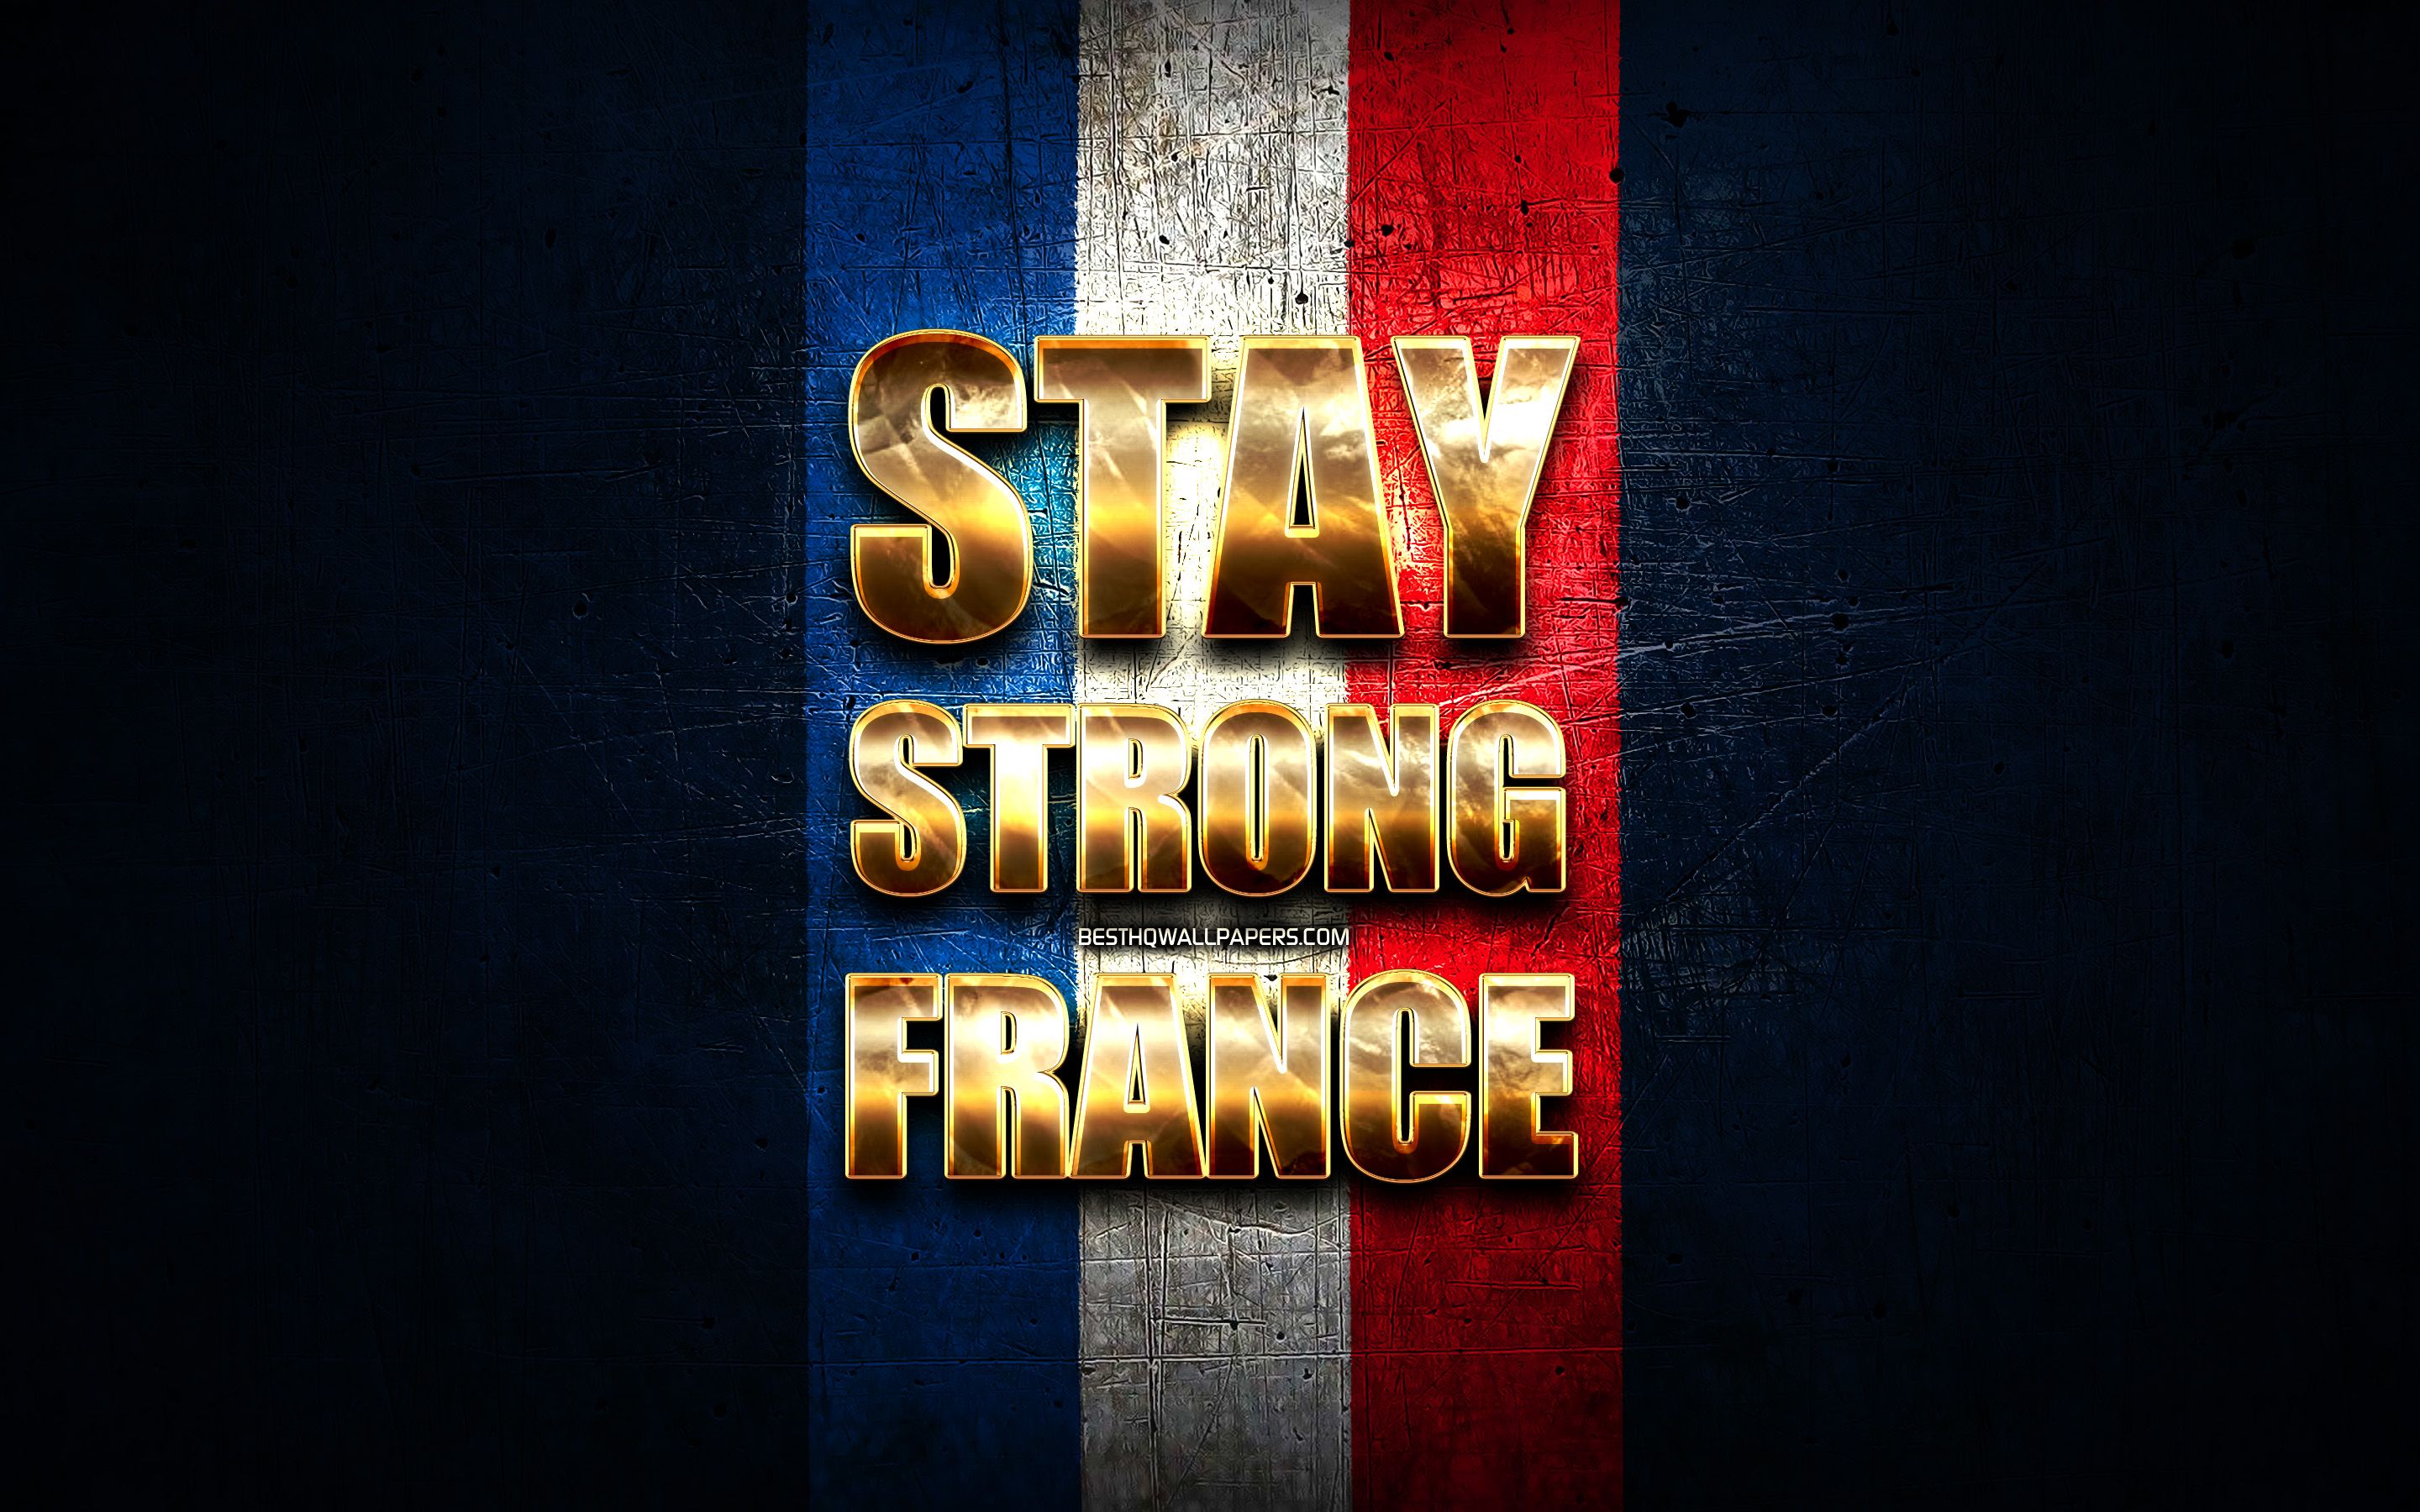 Download wallpaper Stay Strong France, coronavirus, support France, french flag, artwork, french support, flag of France, COVID- Stay Strong France with flag for desktop with resolution 2880x1800. High Quality HD picture wallpaper